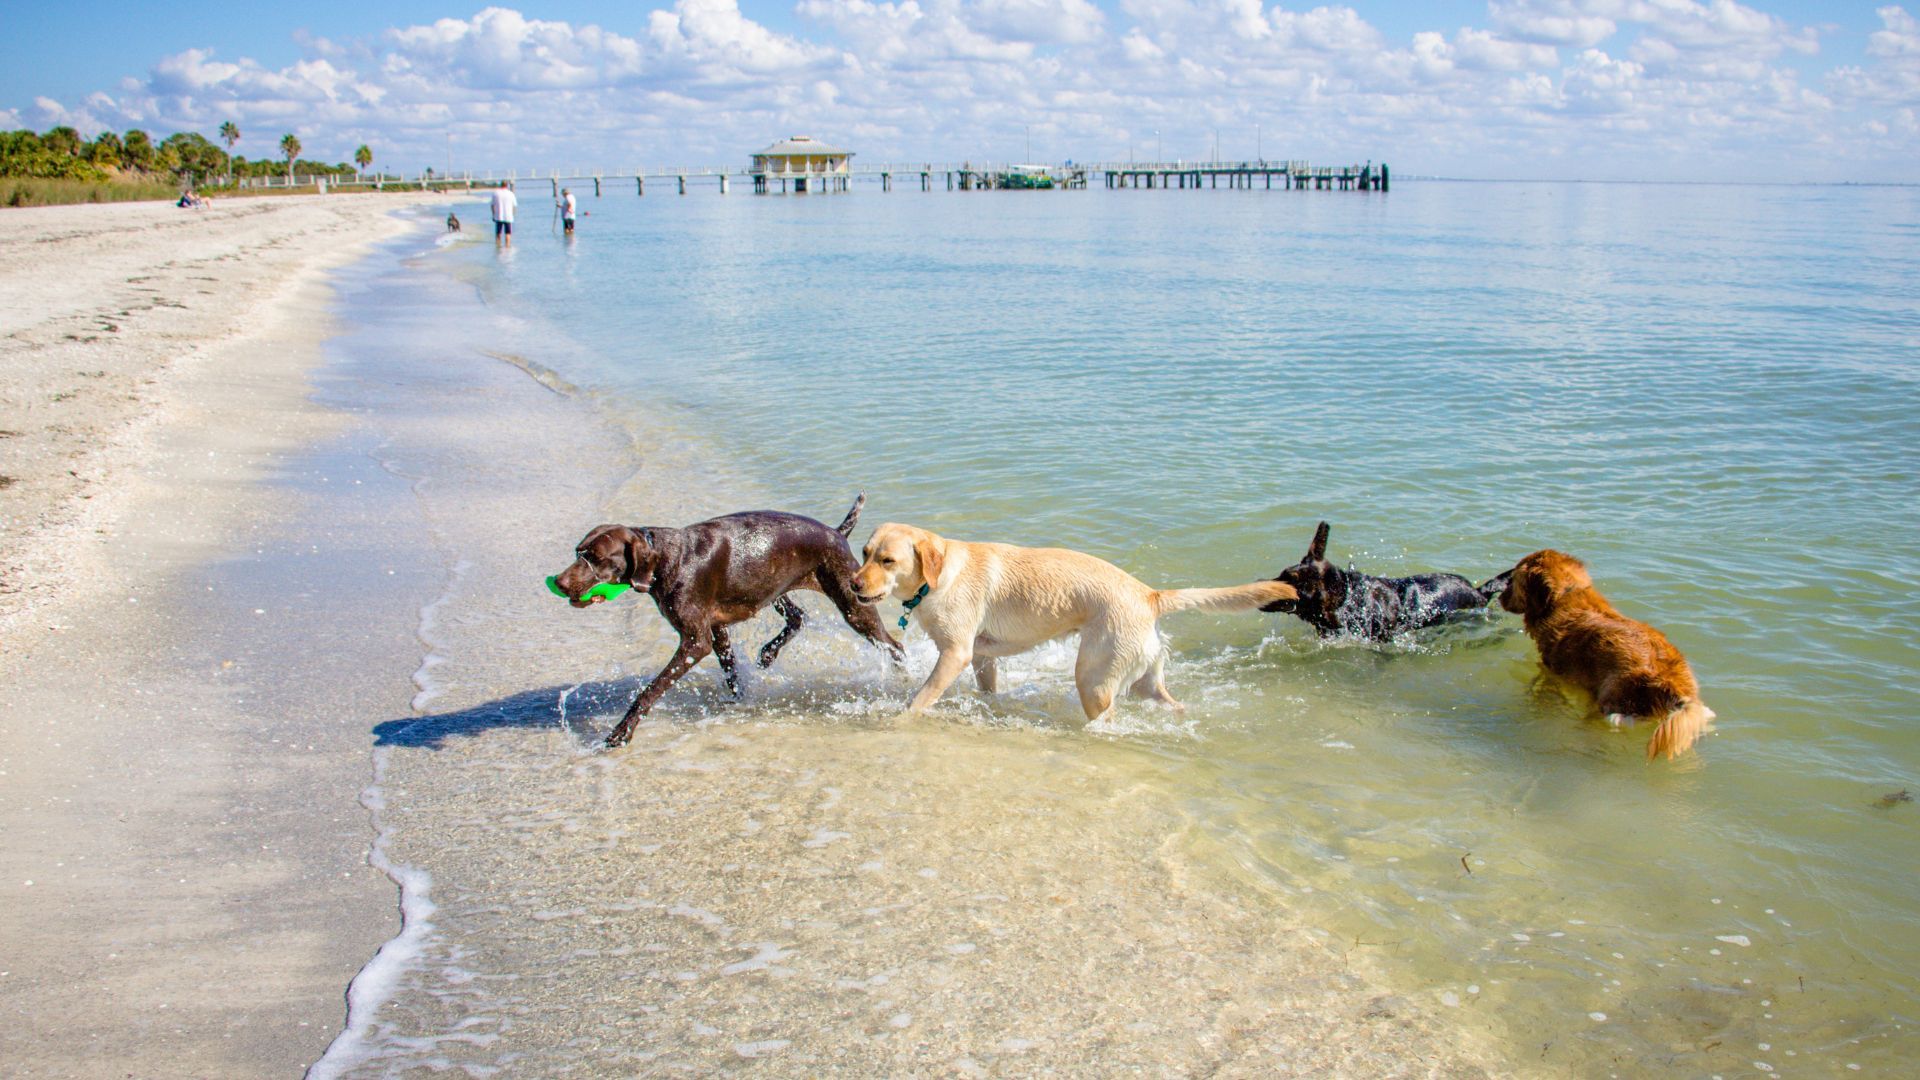 <p>                     Florida is famed for its glorious and golden stretches of white sandy beaches. Take your dog to visit what Panama City Beach has to offer thanks to its dog-friendly section, aptly named Dog Beach. They can enjoy 400 feet of coastline, although leashes are required.                   </p>